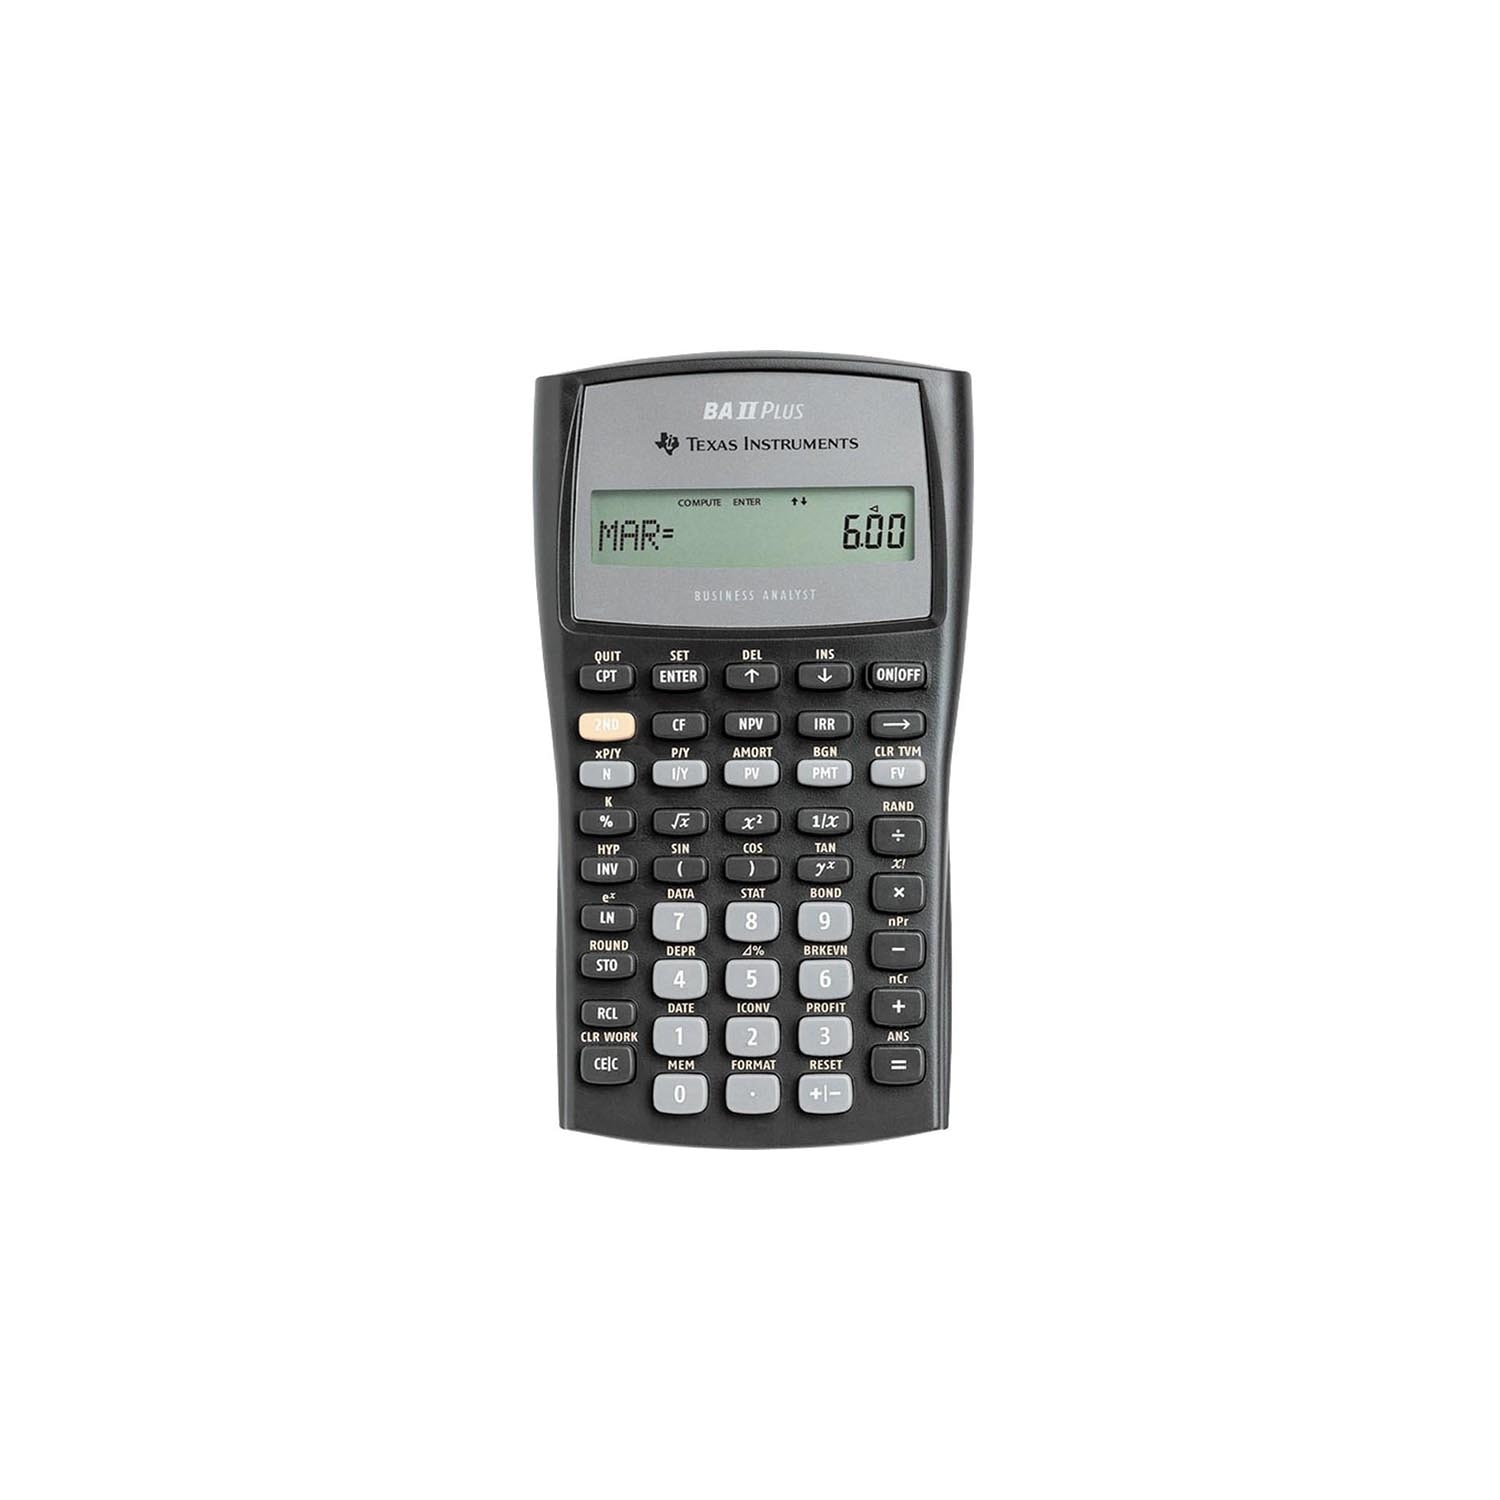 Designed for business professionals and students, this easy-to-use financial calculator delivers powerful computation functions and memory.